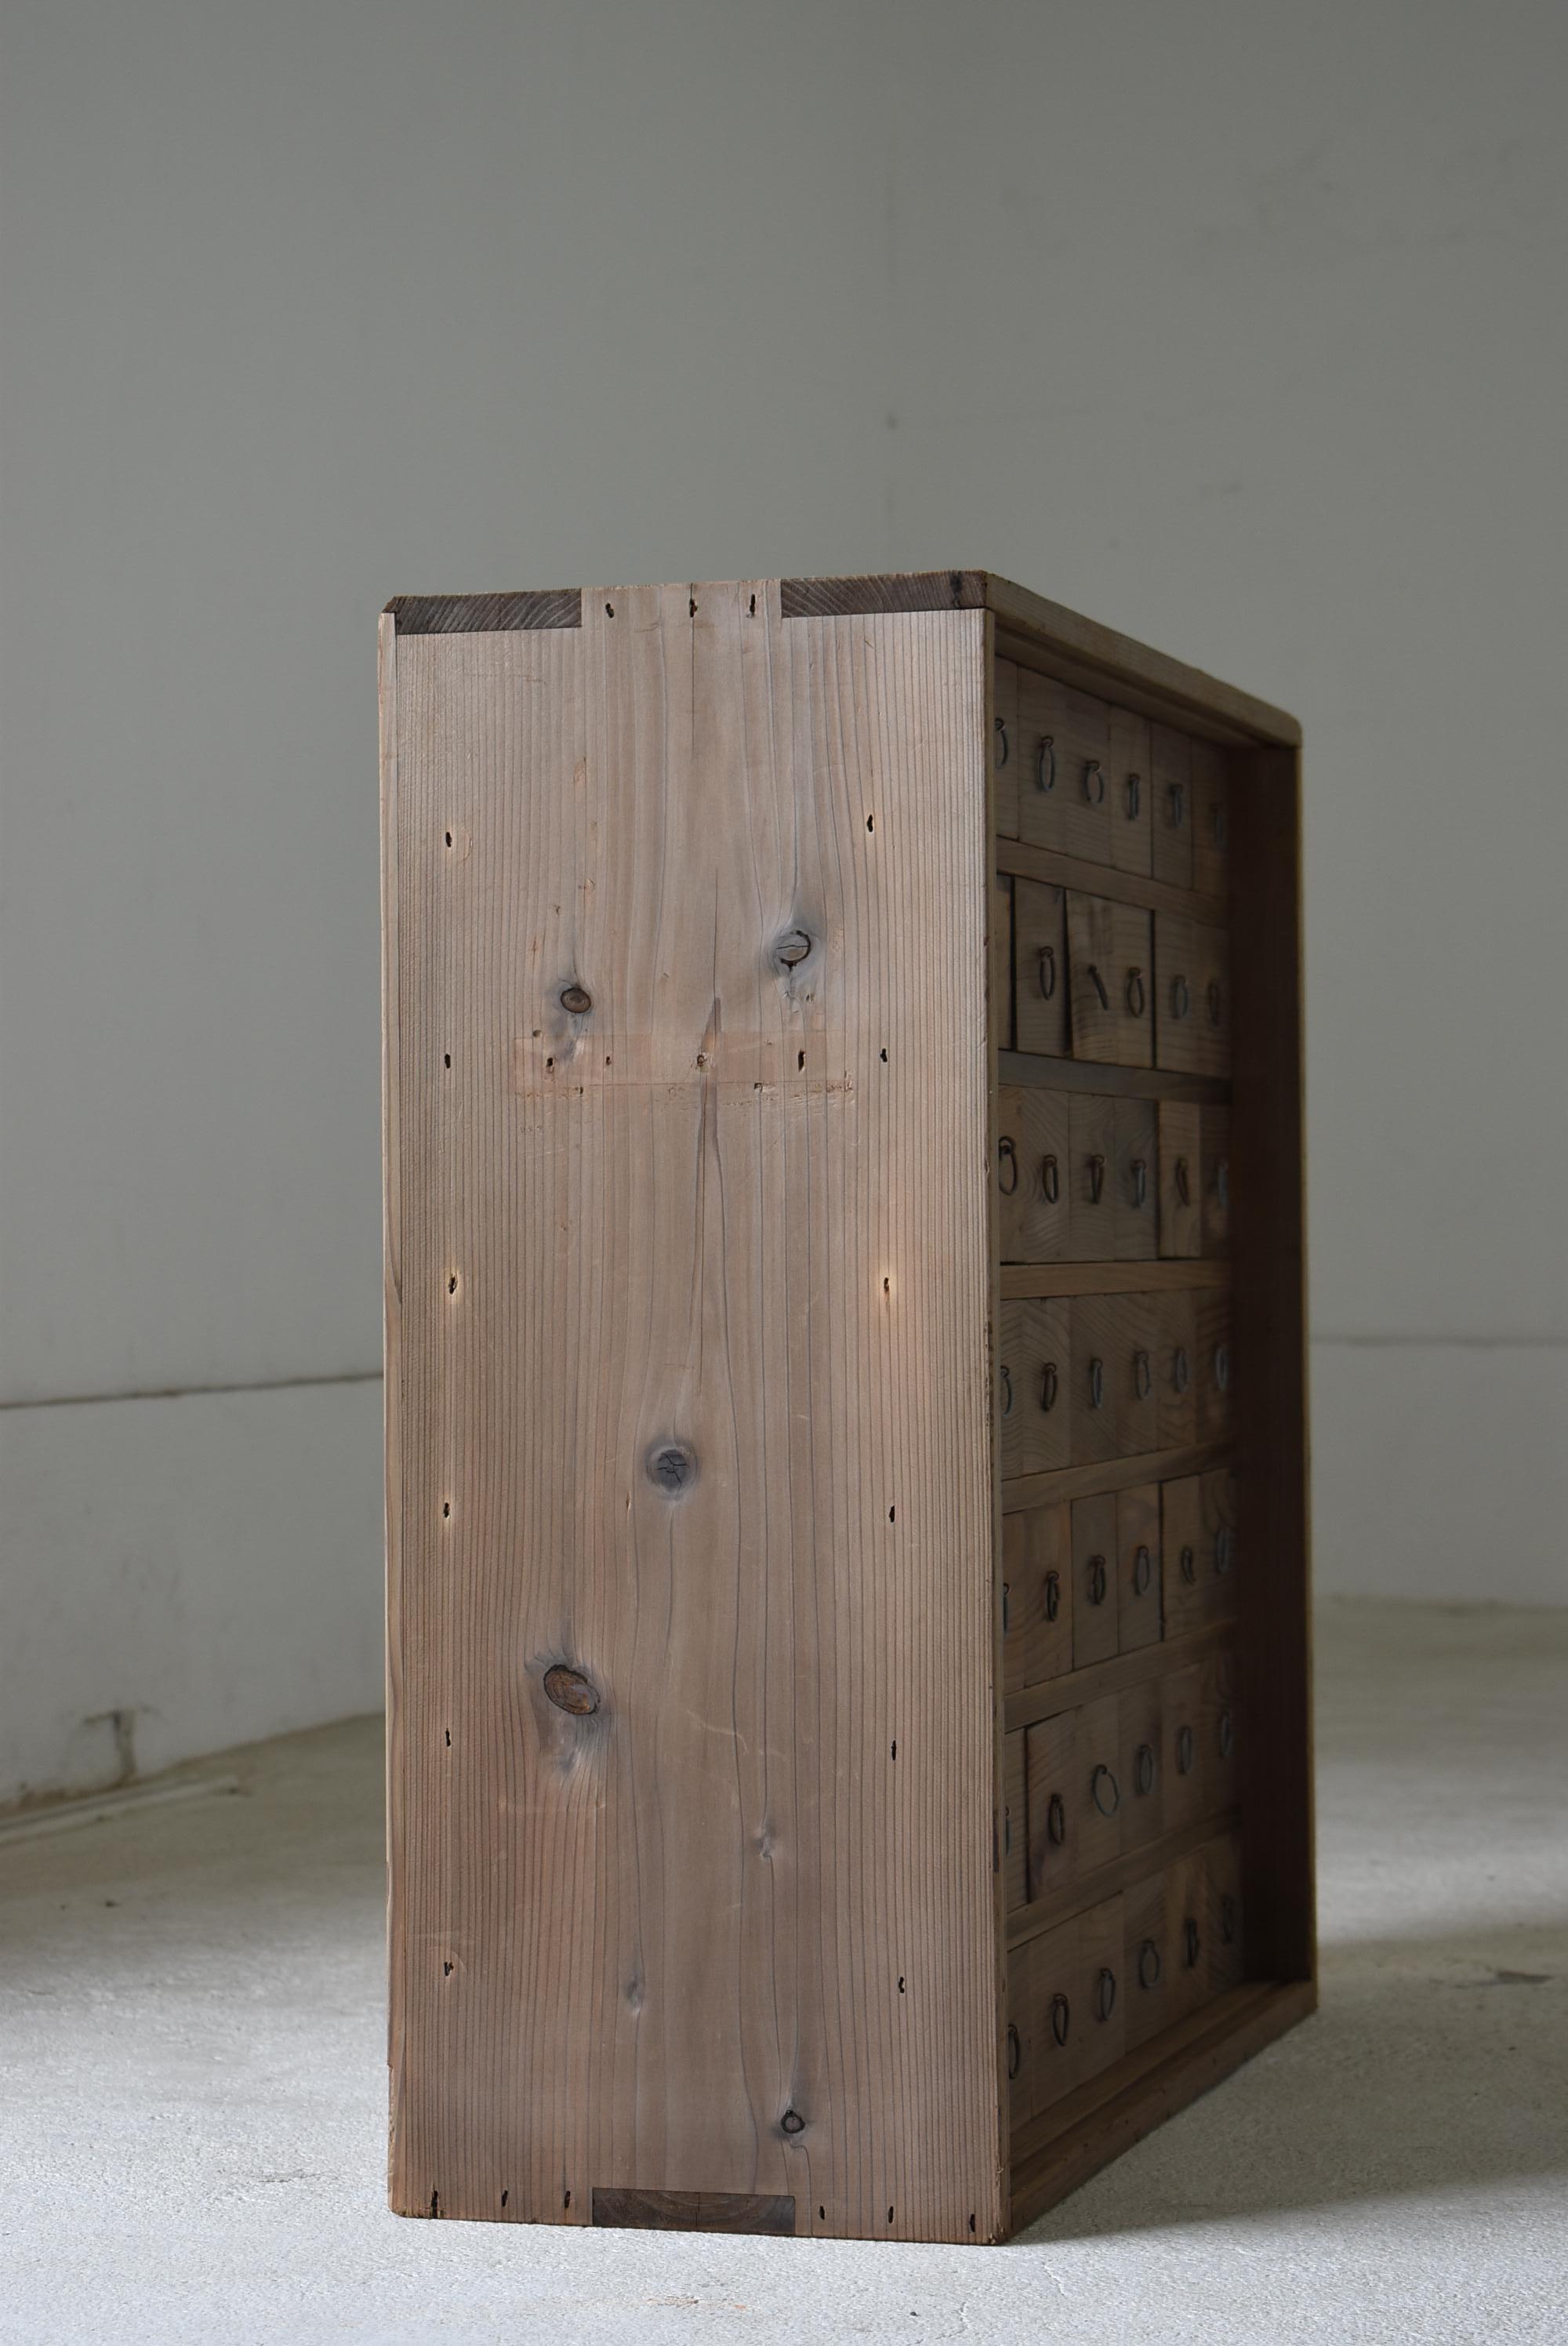 Japanese Antique Apothecary Drawers 1860s-1900s/Tansu Storage Mingei Cabinets 7